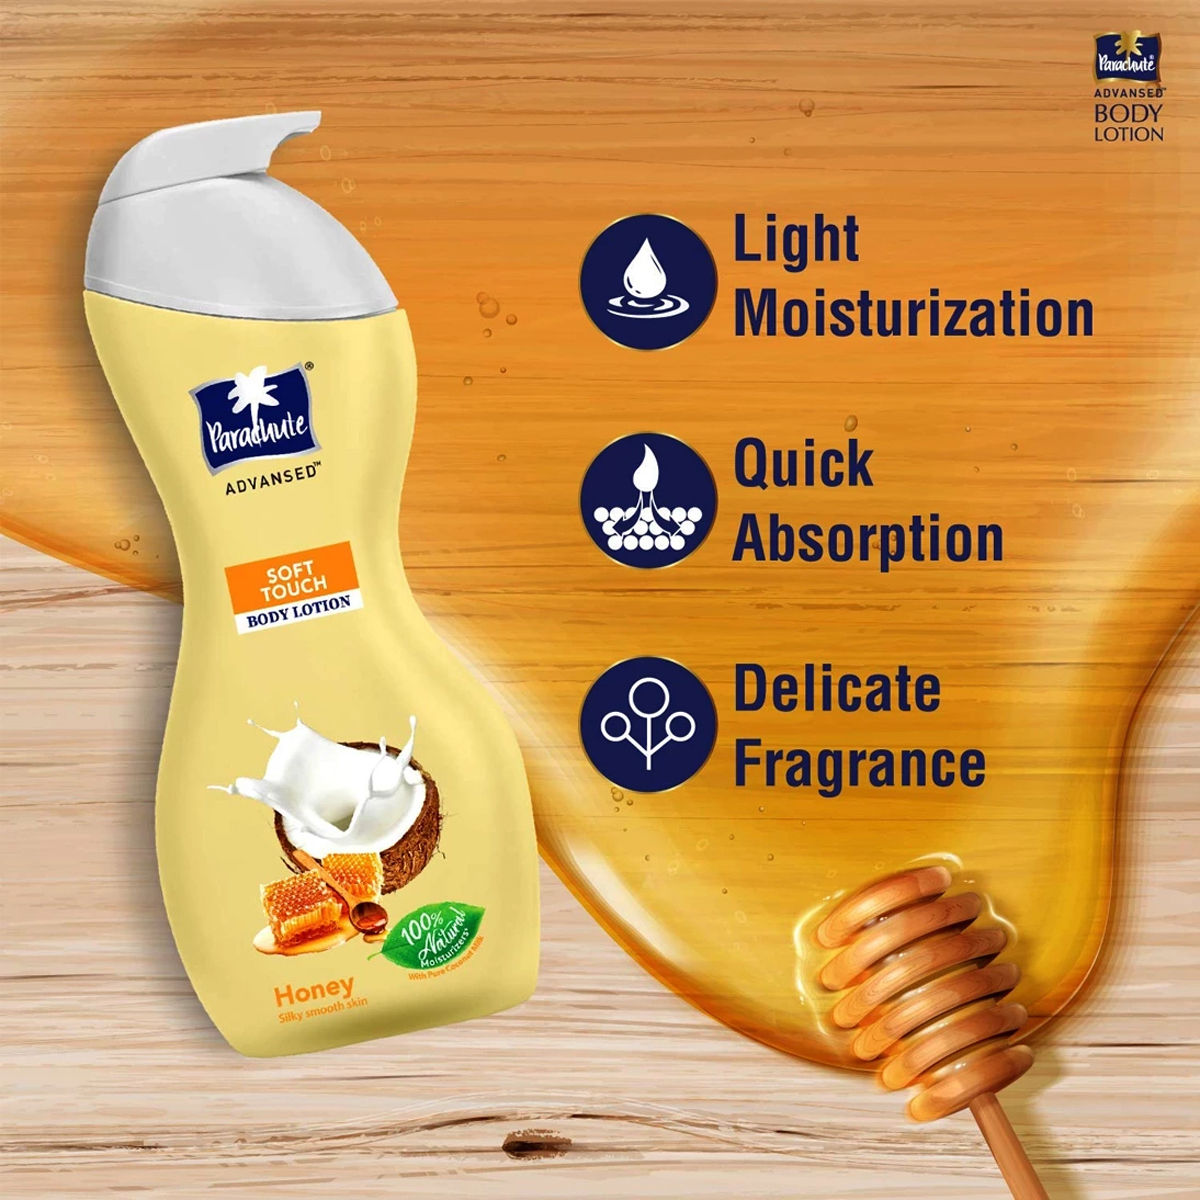 Parachute Advansed Soft Touch Body Lotion, 250 ml, Pack of 1 